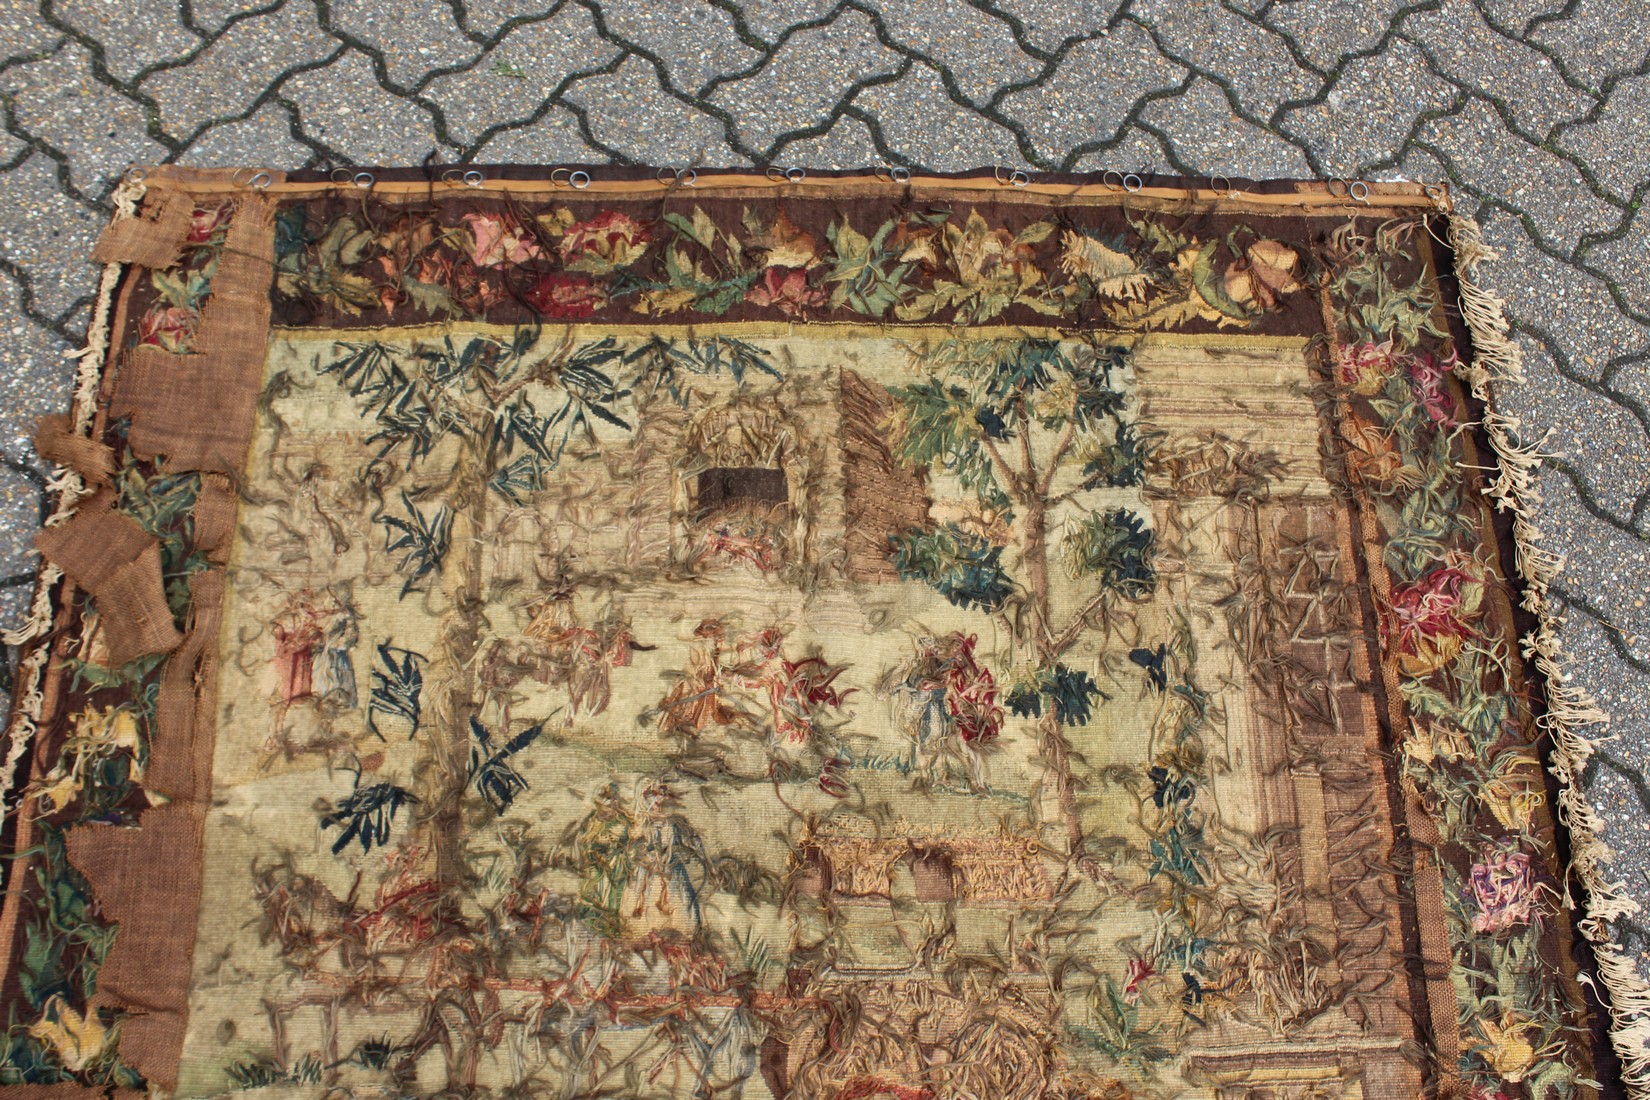 A GOOD 18TH CENTURY FRENCH TAPESTRY decorated with many figures within a floral border. 6ft high x - Image 7 of 9